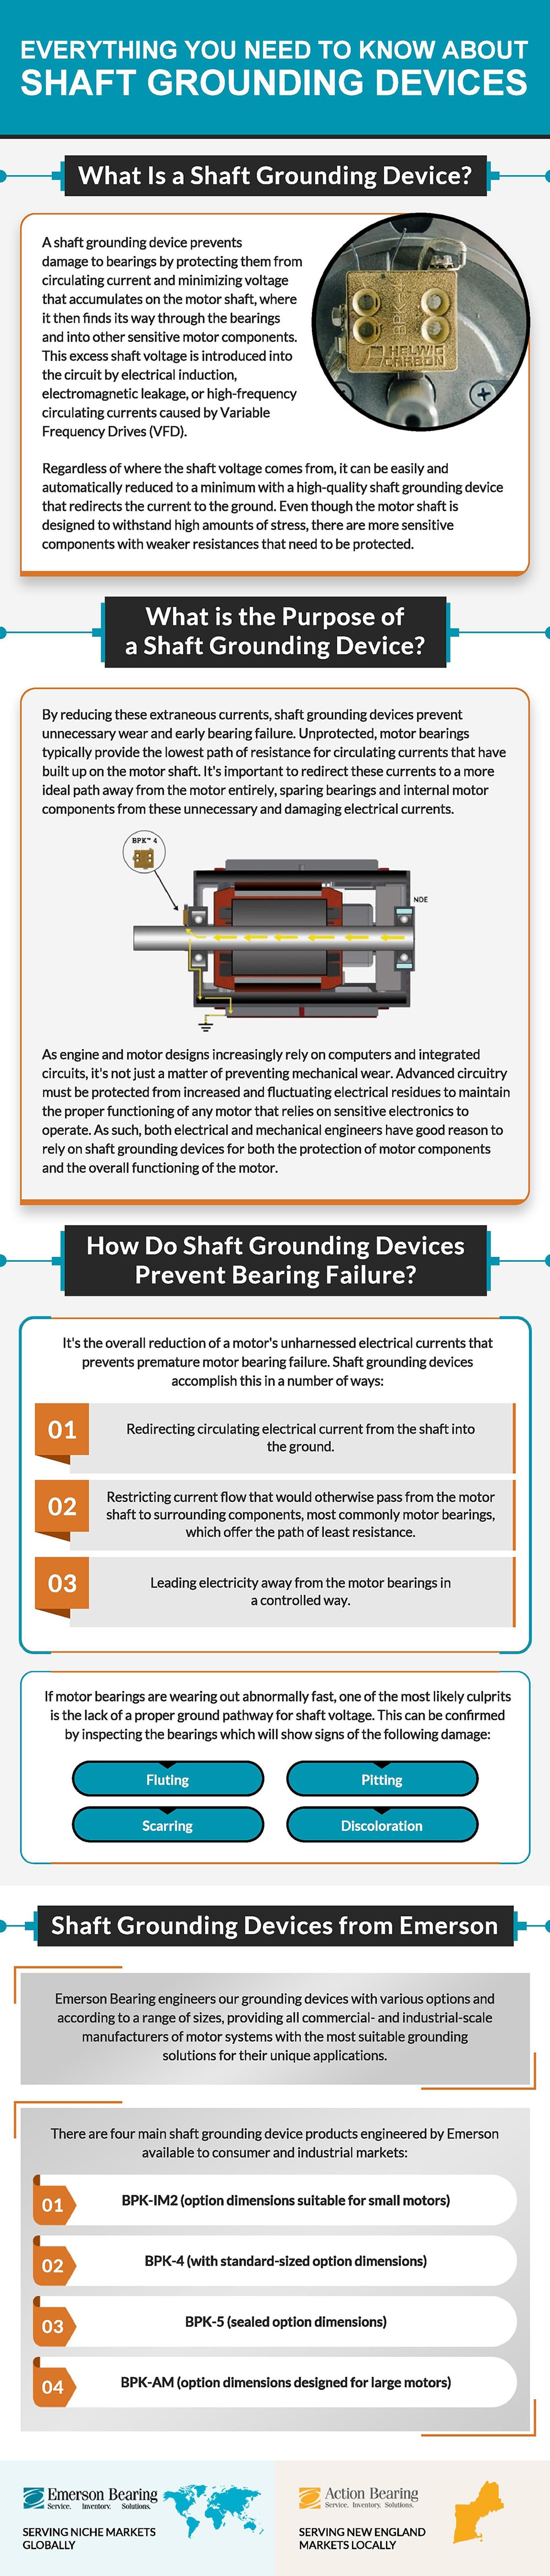 Everything You Need to Know About Shaft Grounding Devices